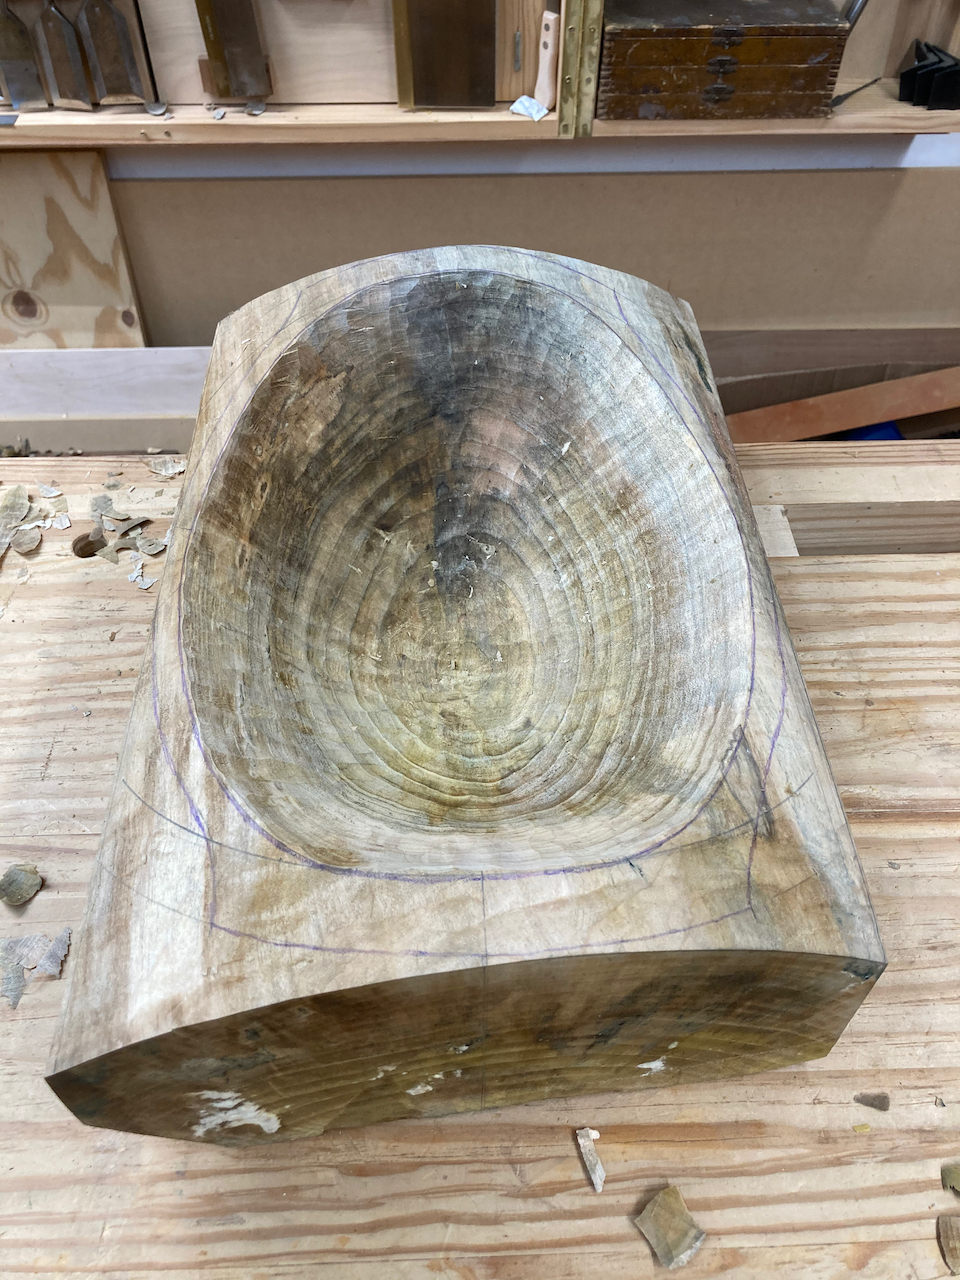 Inside of the bowl roughed in